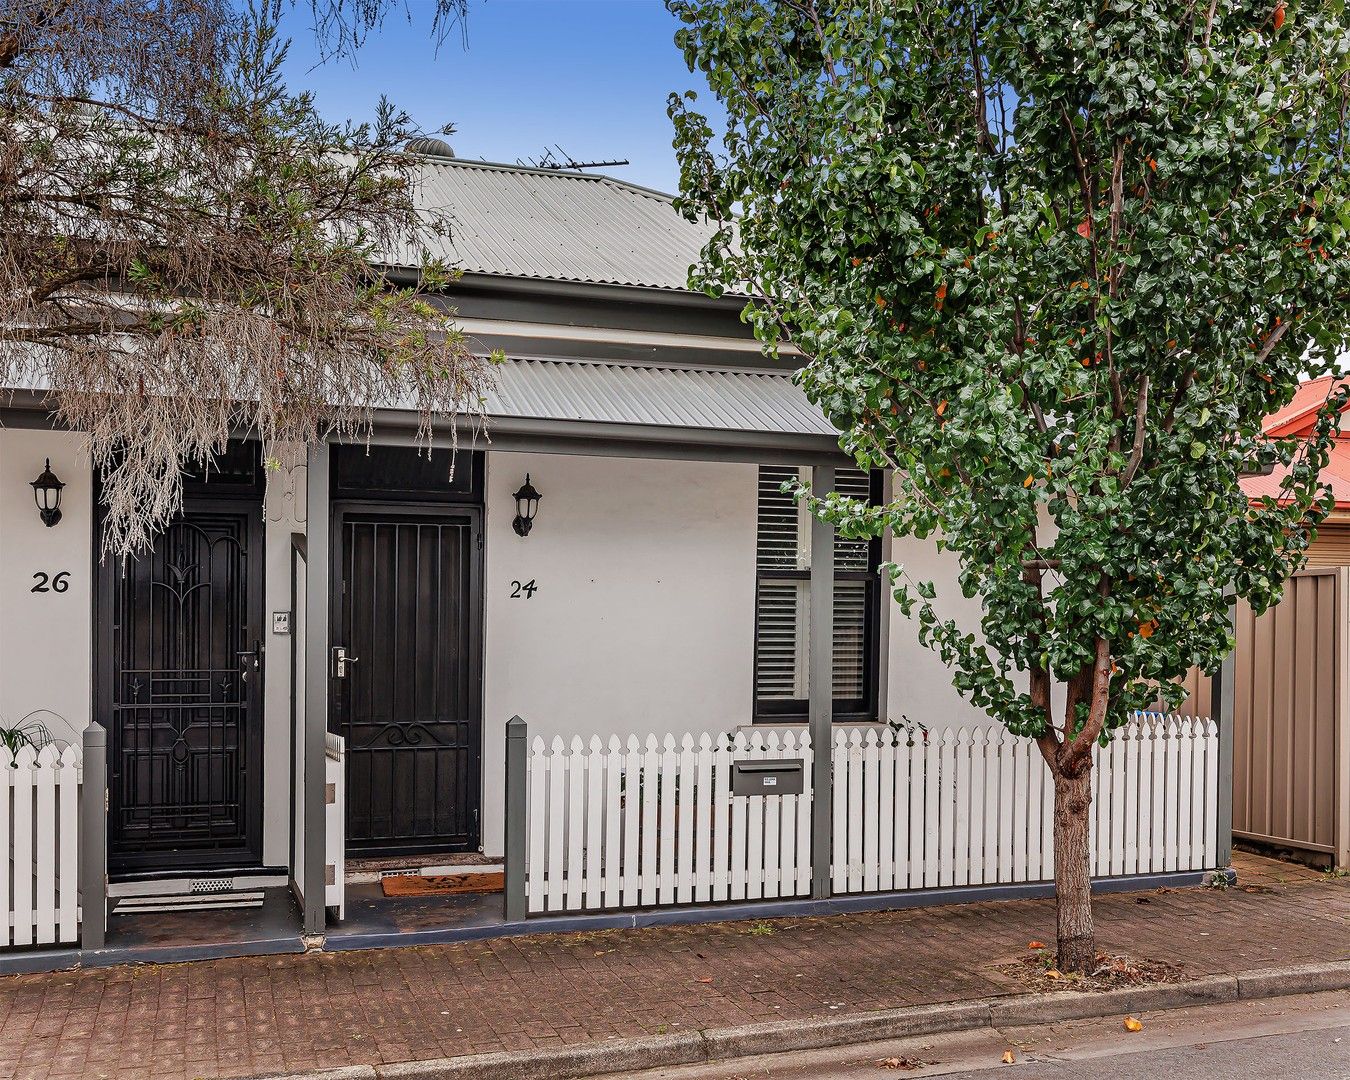 3 bedrooms Semi-Detached in 24 Townsend Street PARKSIDE SA, 5063